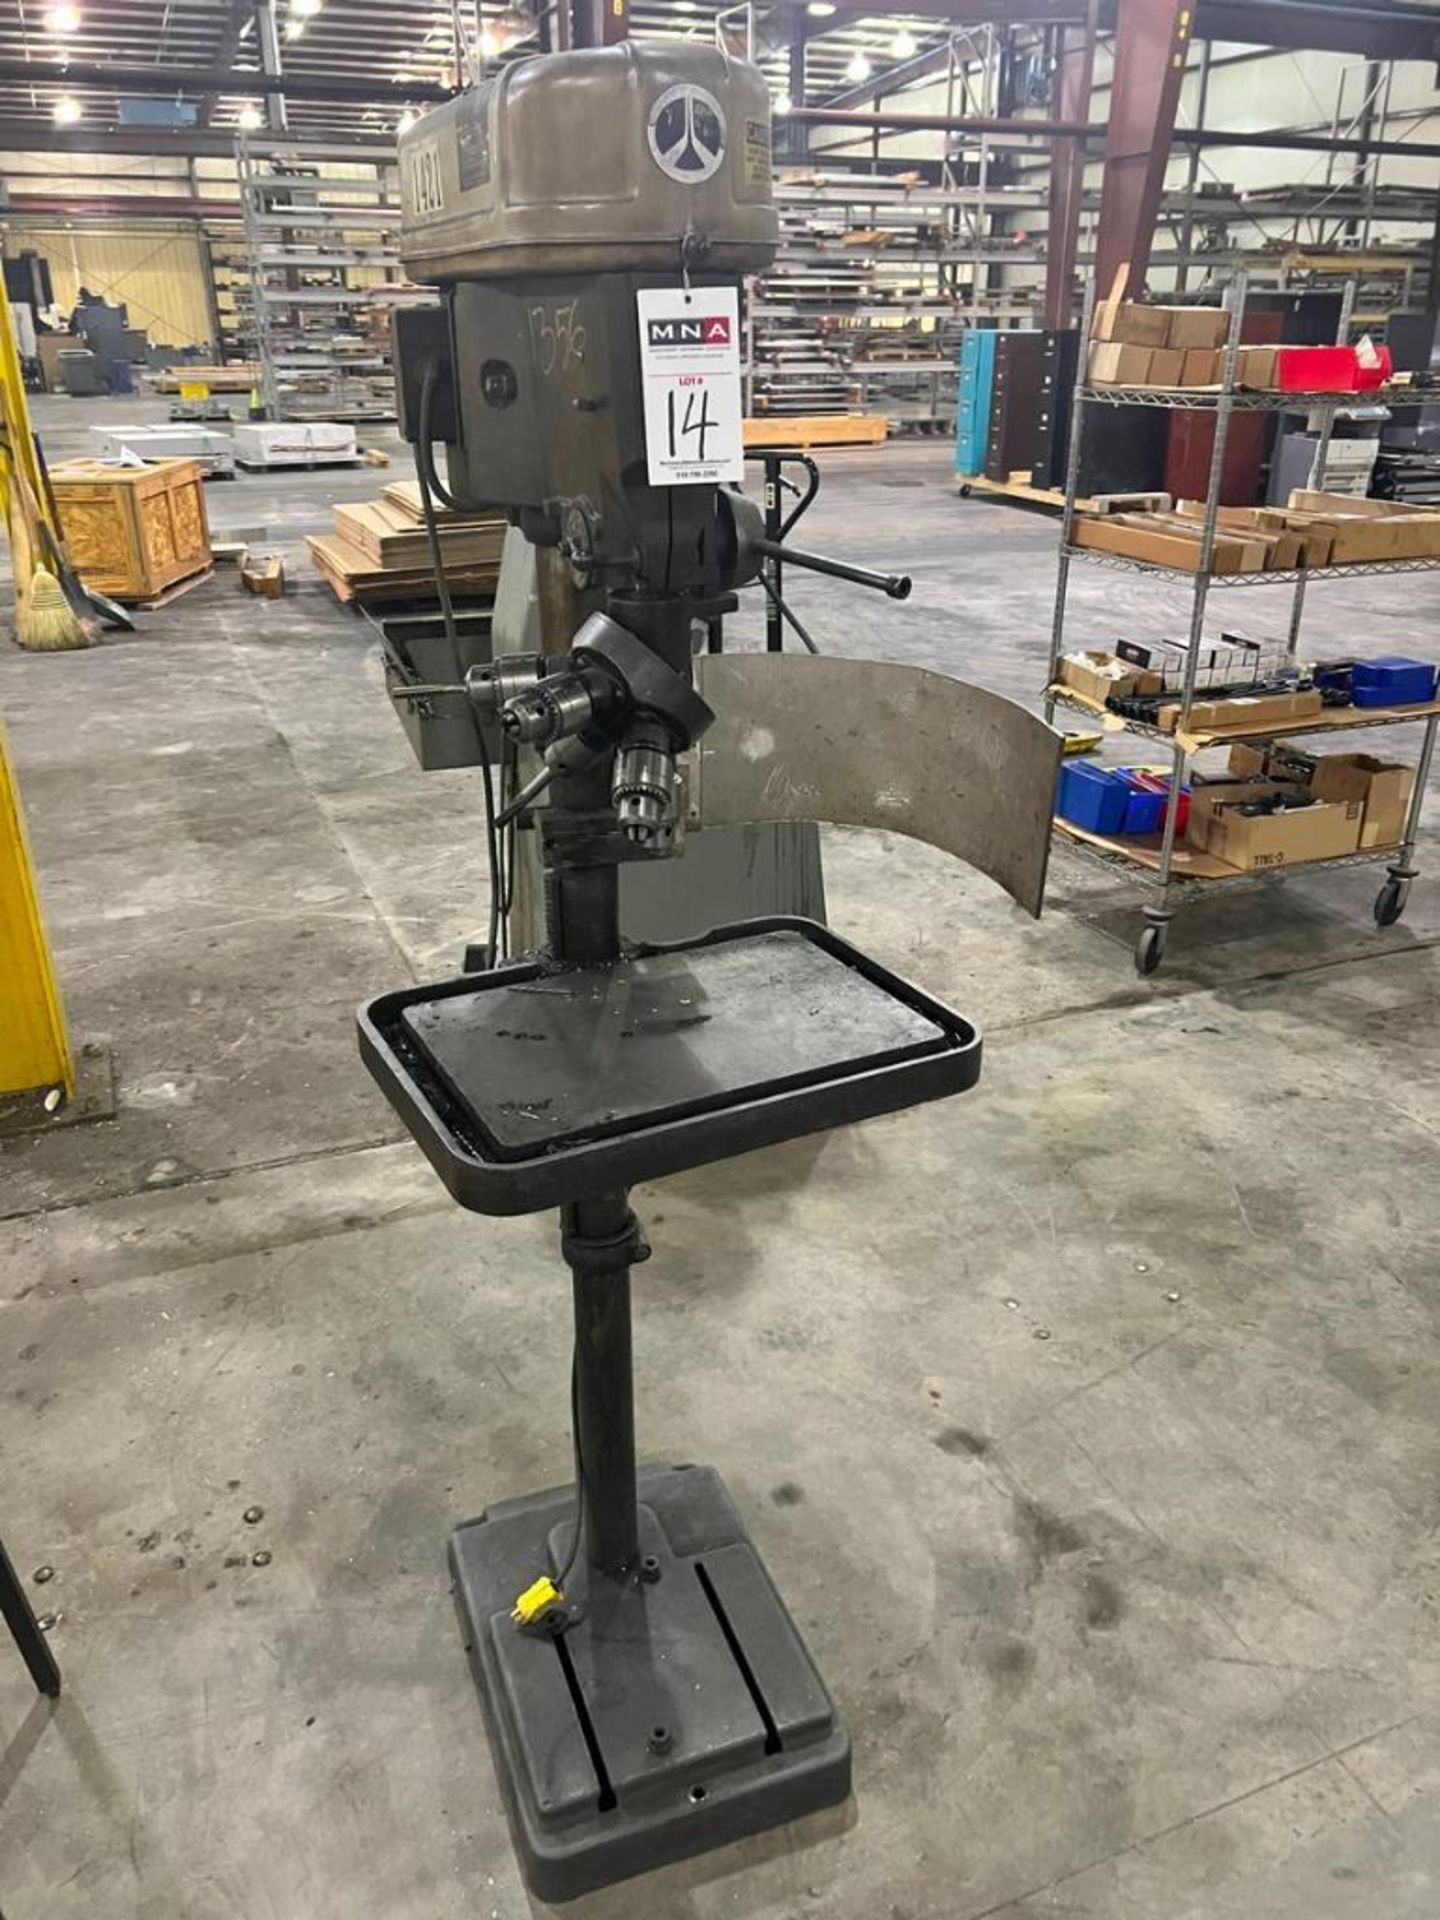 Rockwell 15-665 15" Floor Mounted Drill Press. 18"x12" Adjustable Height Table, 4" Stroke with The Q